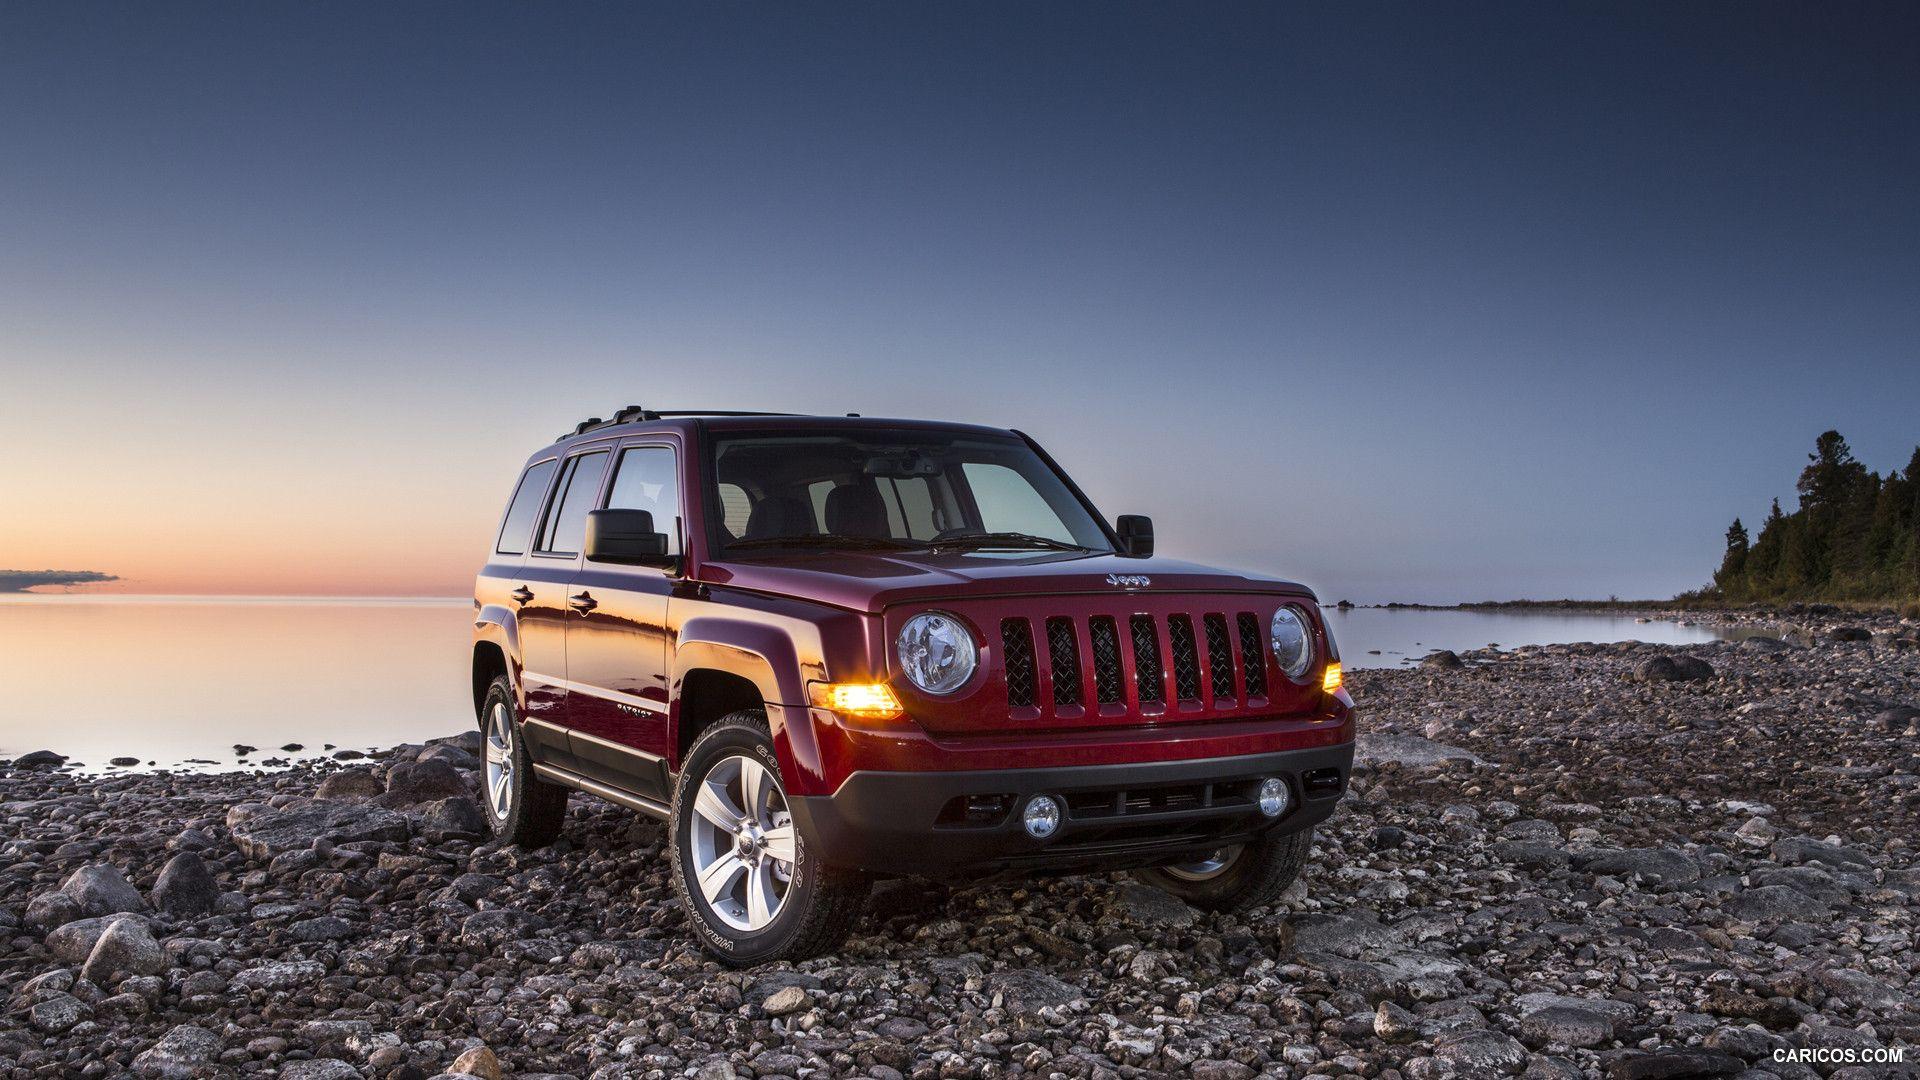 2015 Jeep Patriot Mods Hd Wallpapers For Mac 2015 Jeep Pat Flickr